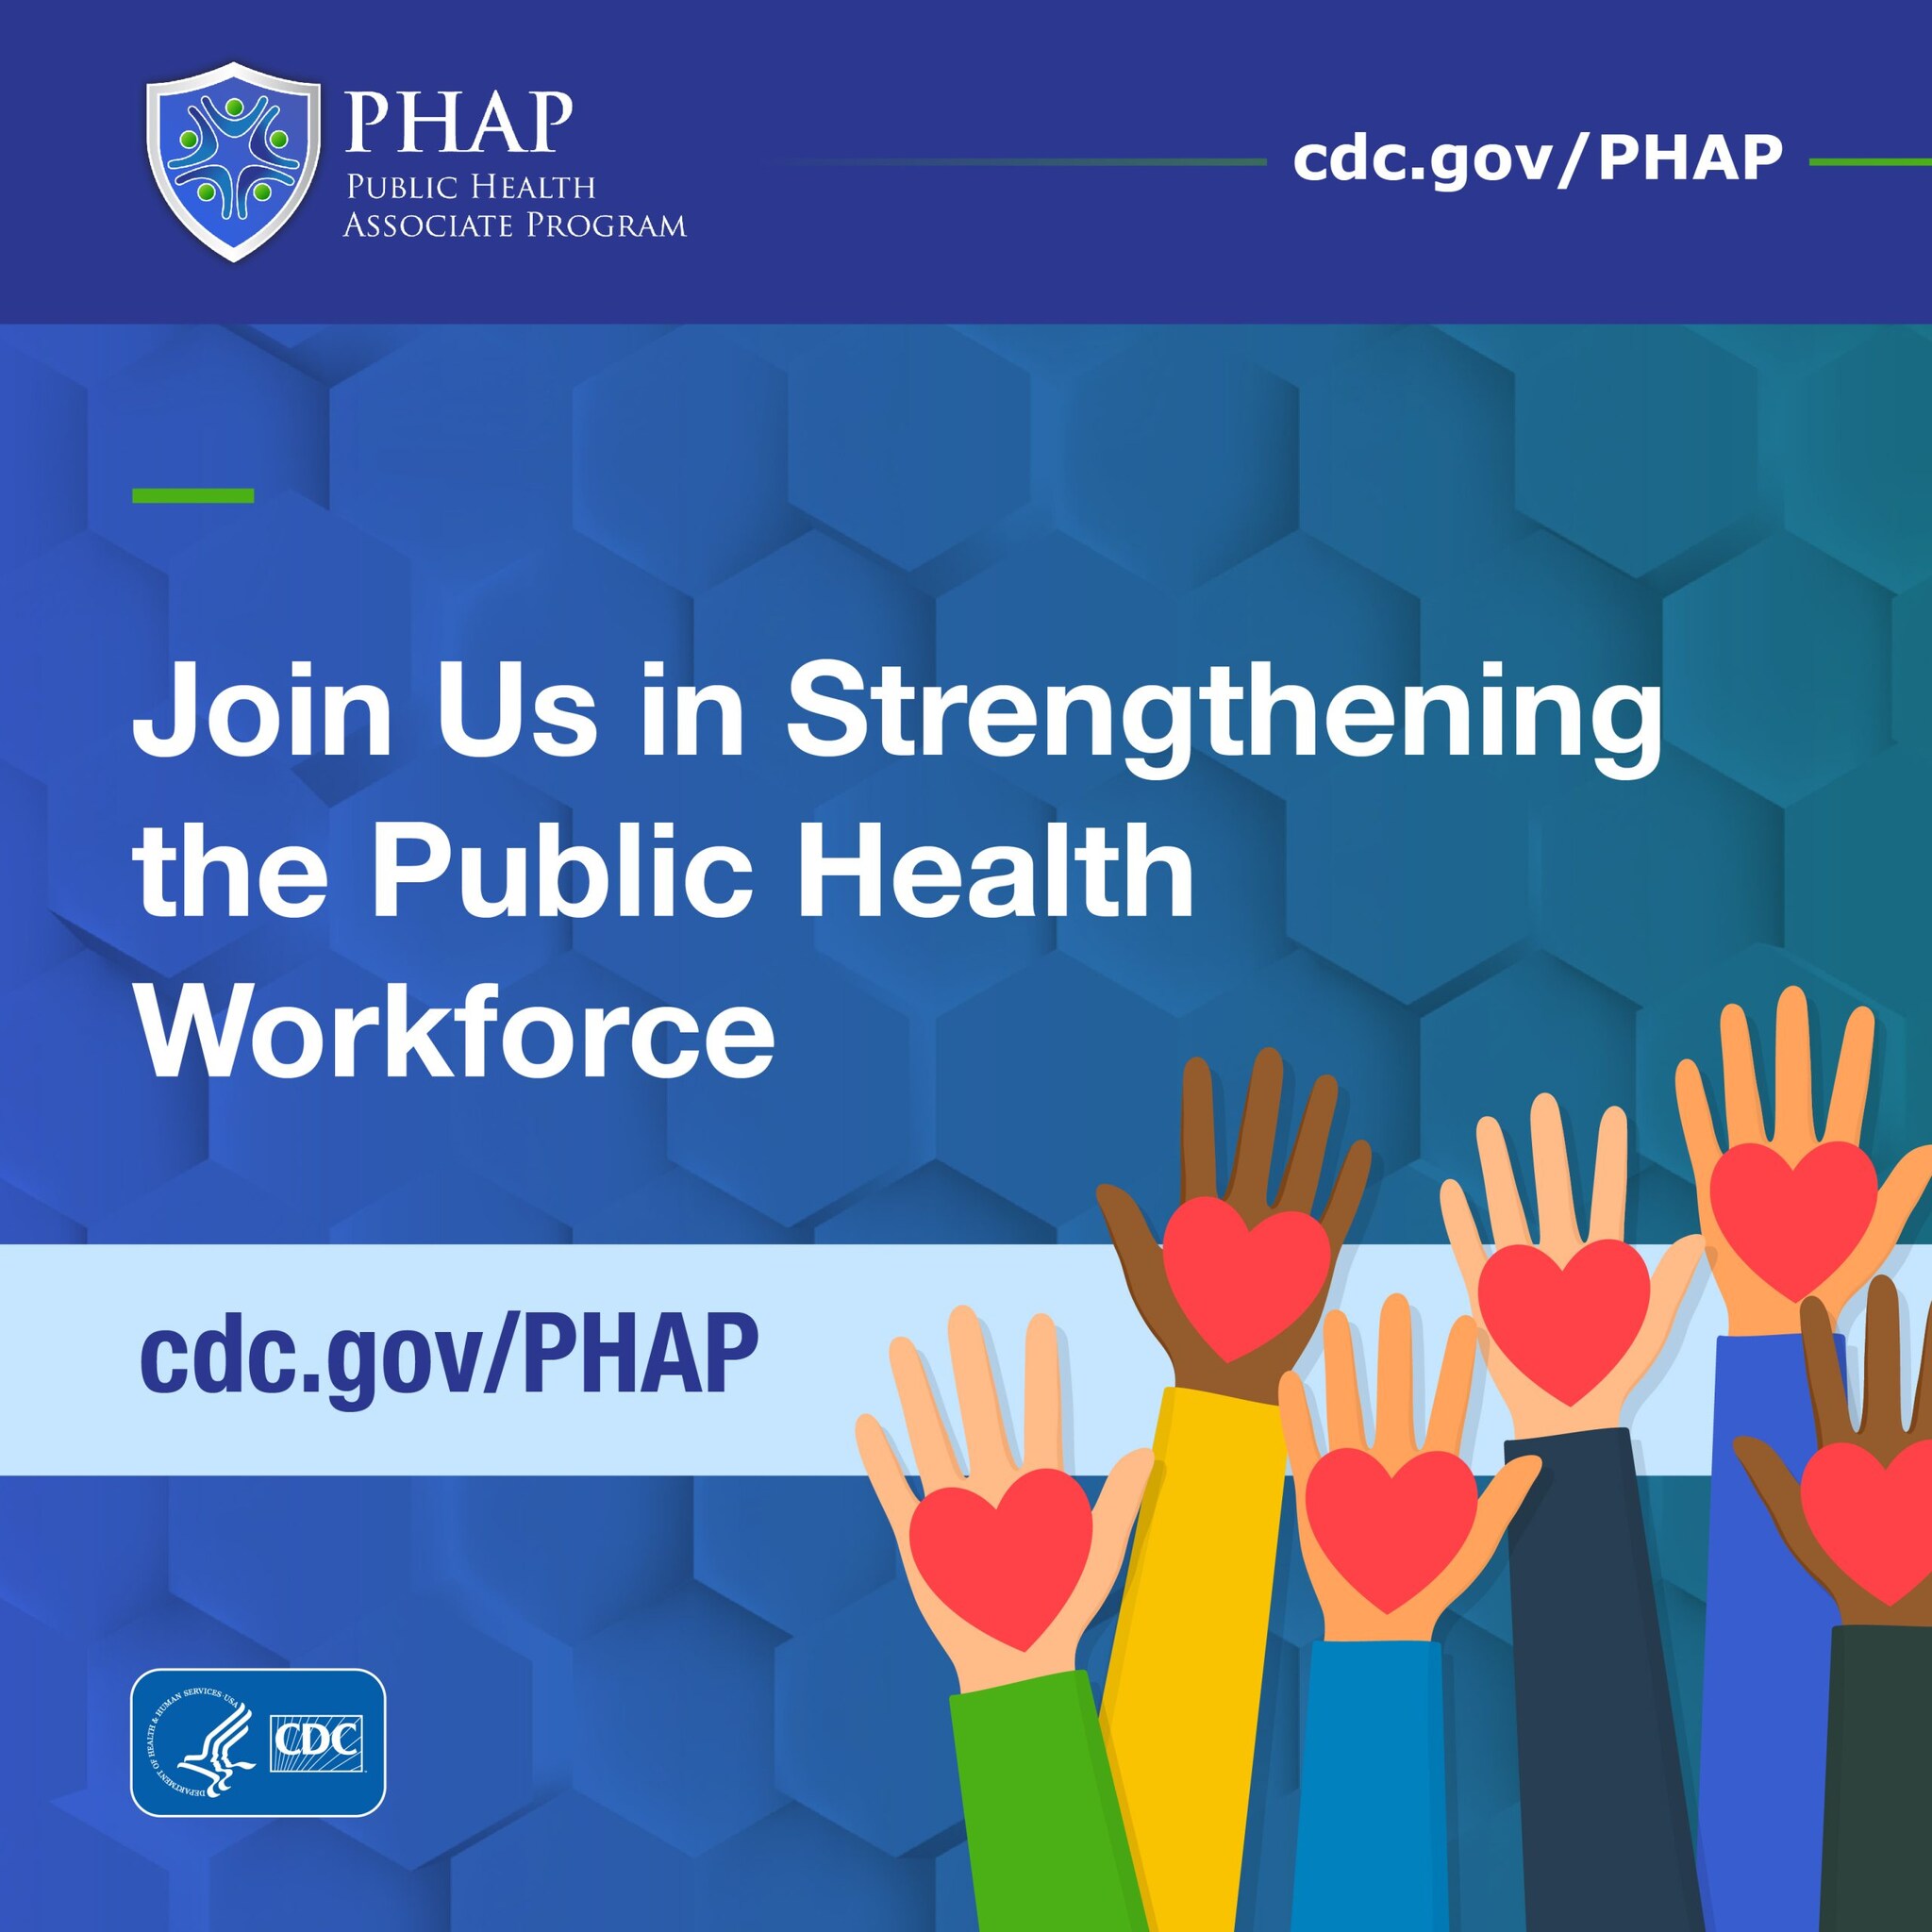 improve your organization's ability to deliver public health services